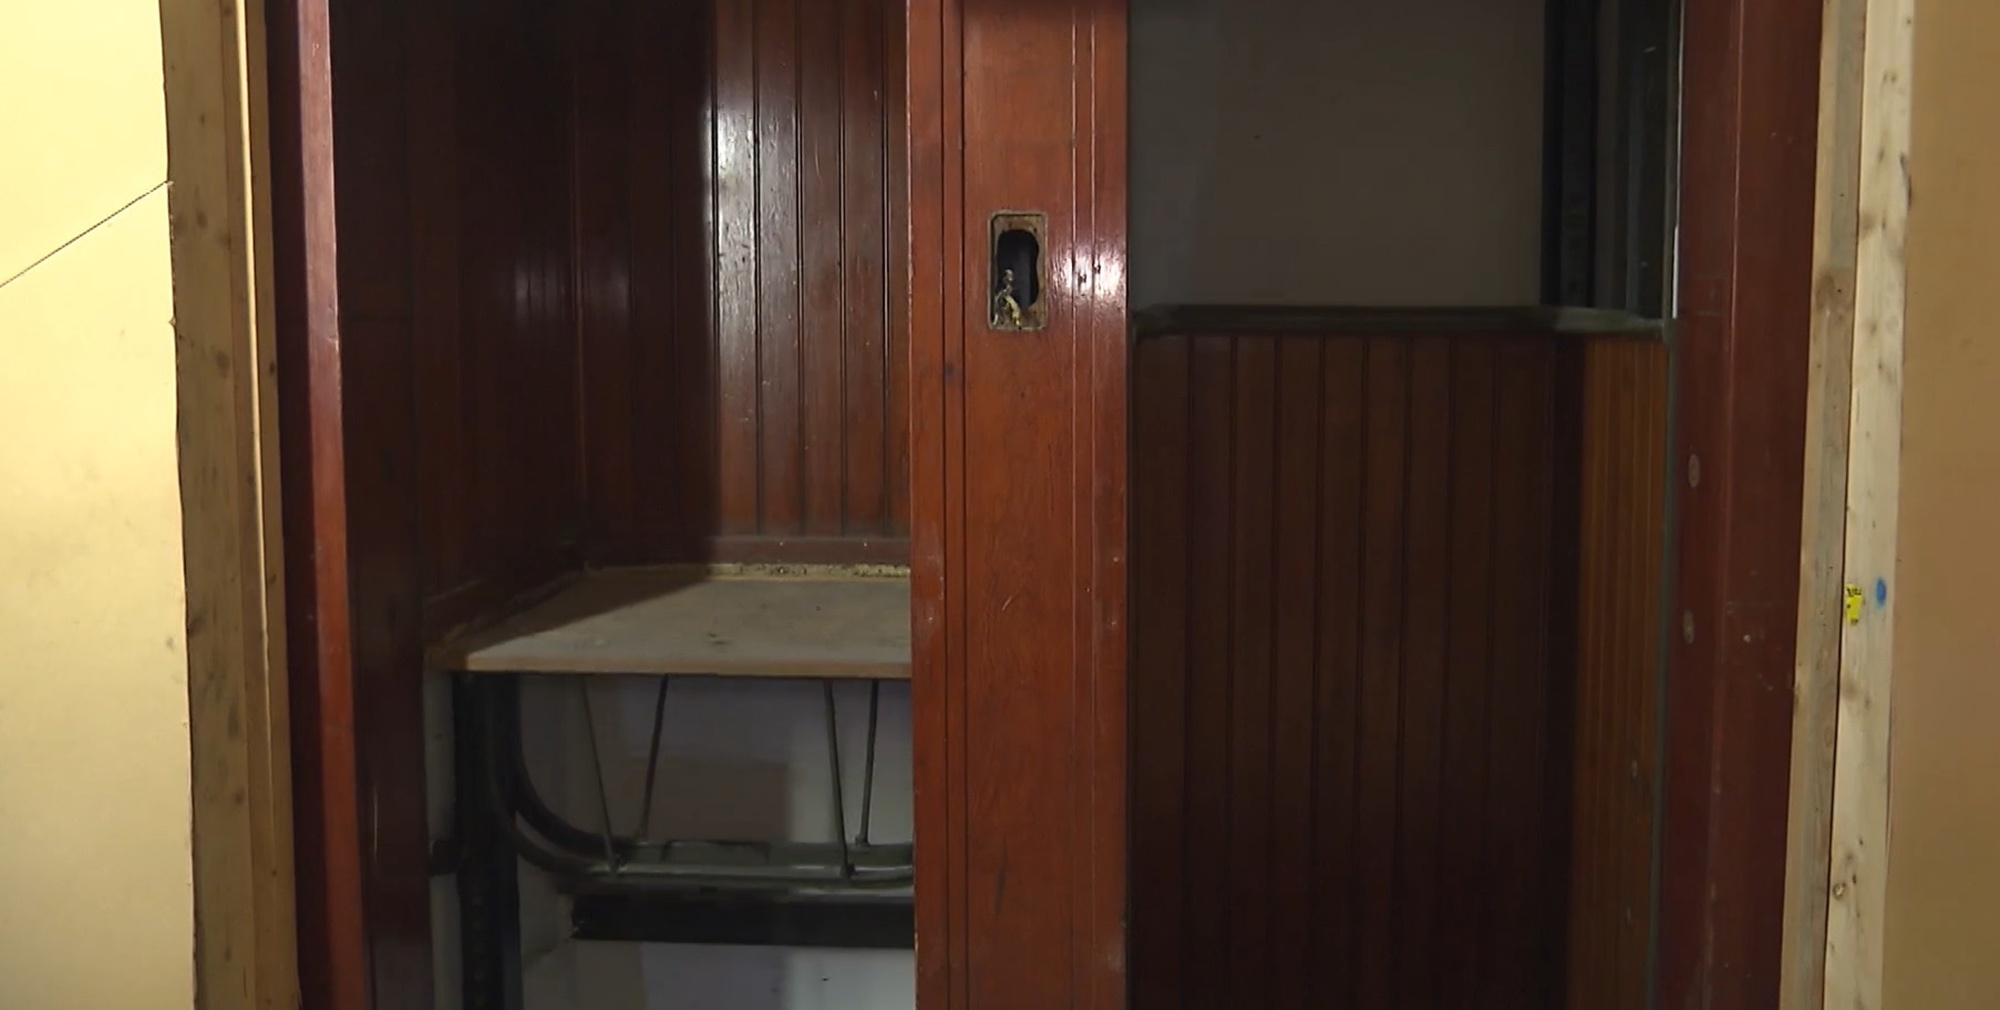 Read more about the article UPLIFTING NEWS: World’s Oldest Paternoster Elevator Back In Service